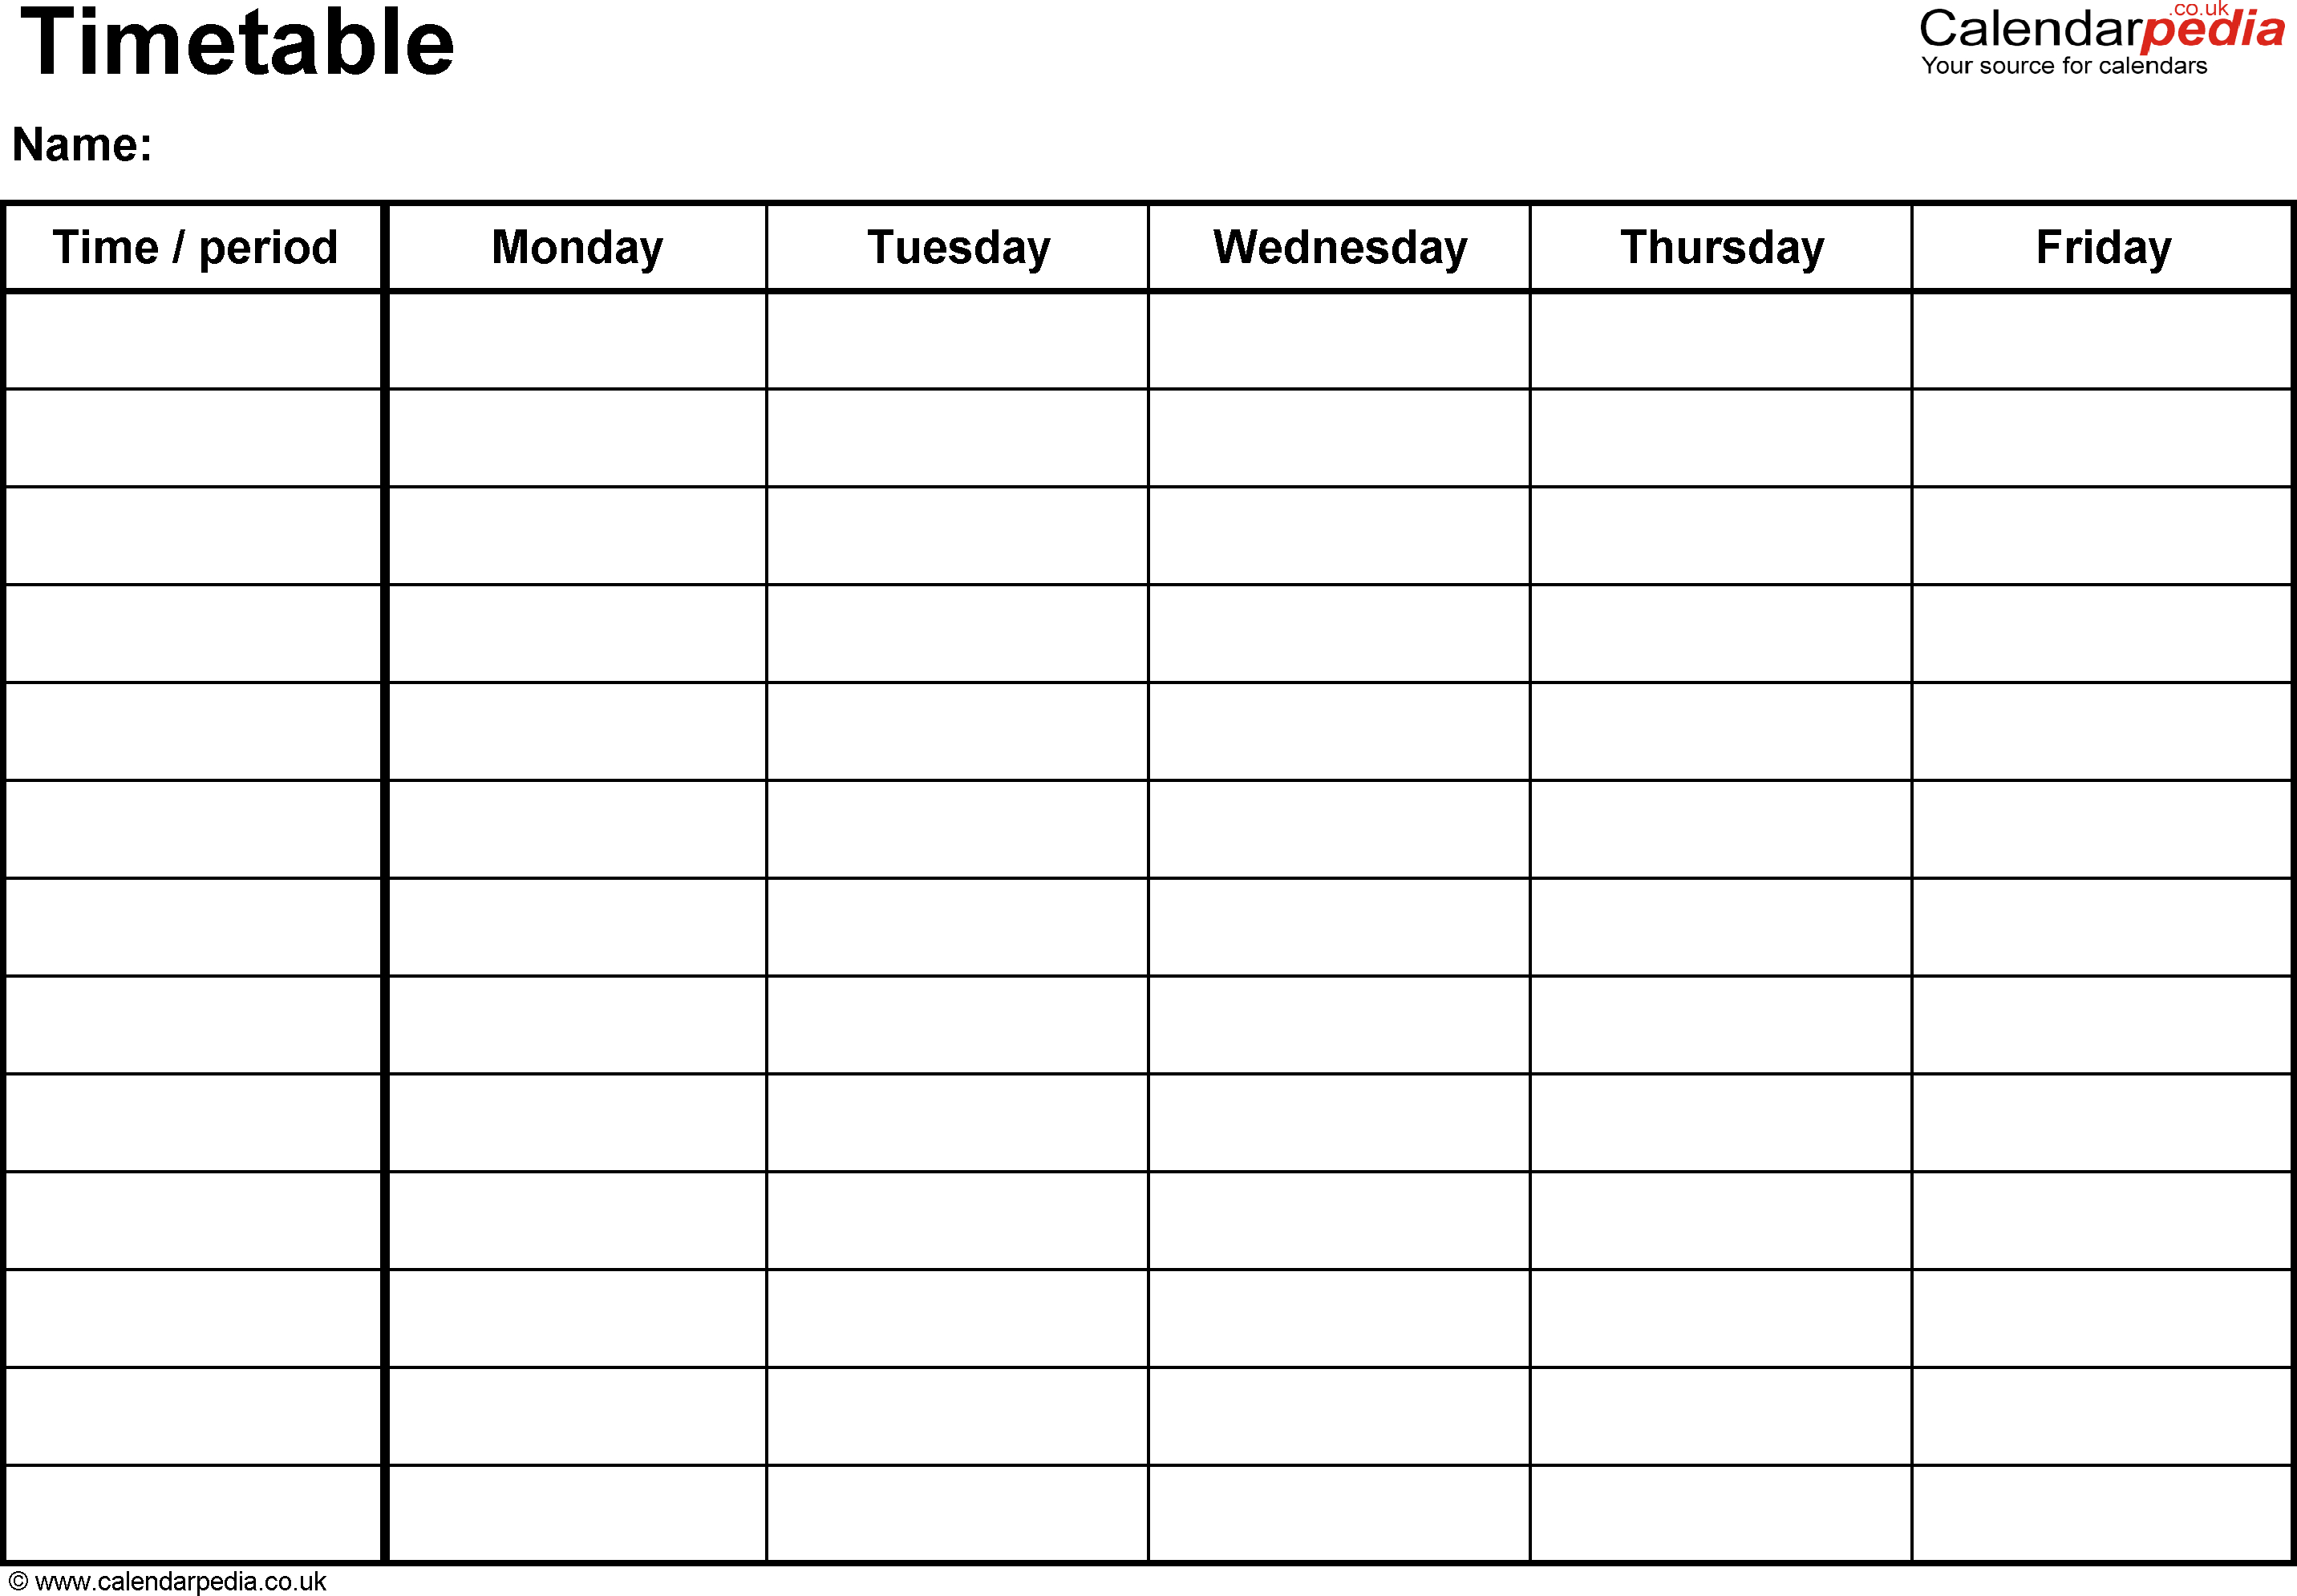 Timetable Templates For Microsoft Word - Free And Printable - Free Printable Blank Weekly Schedule